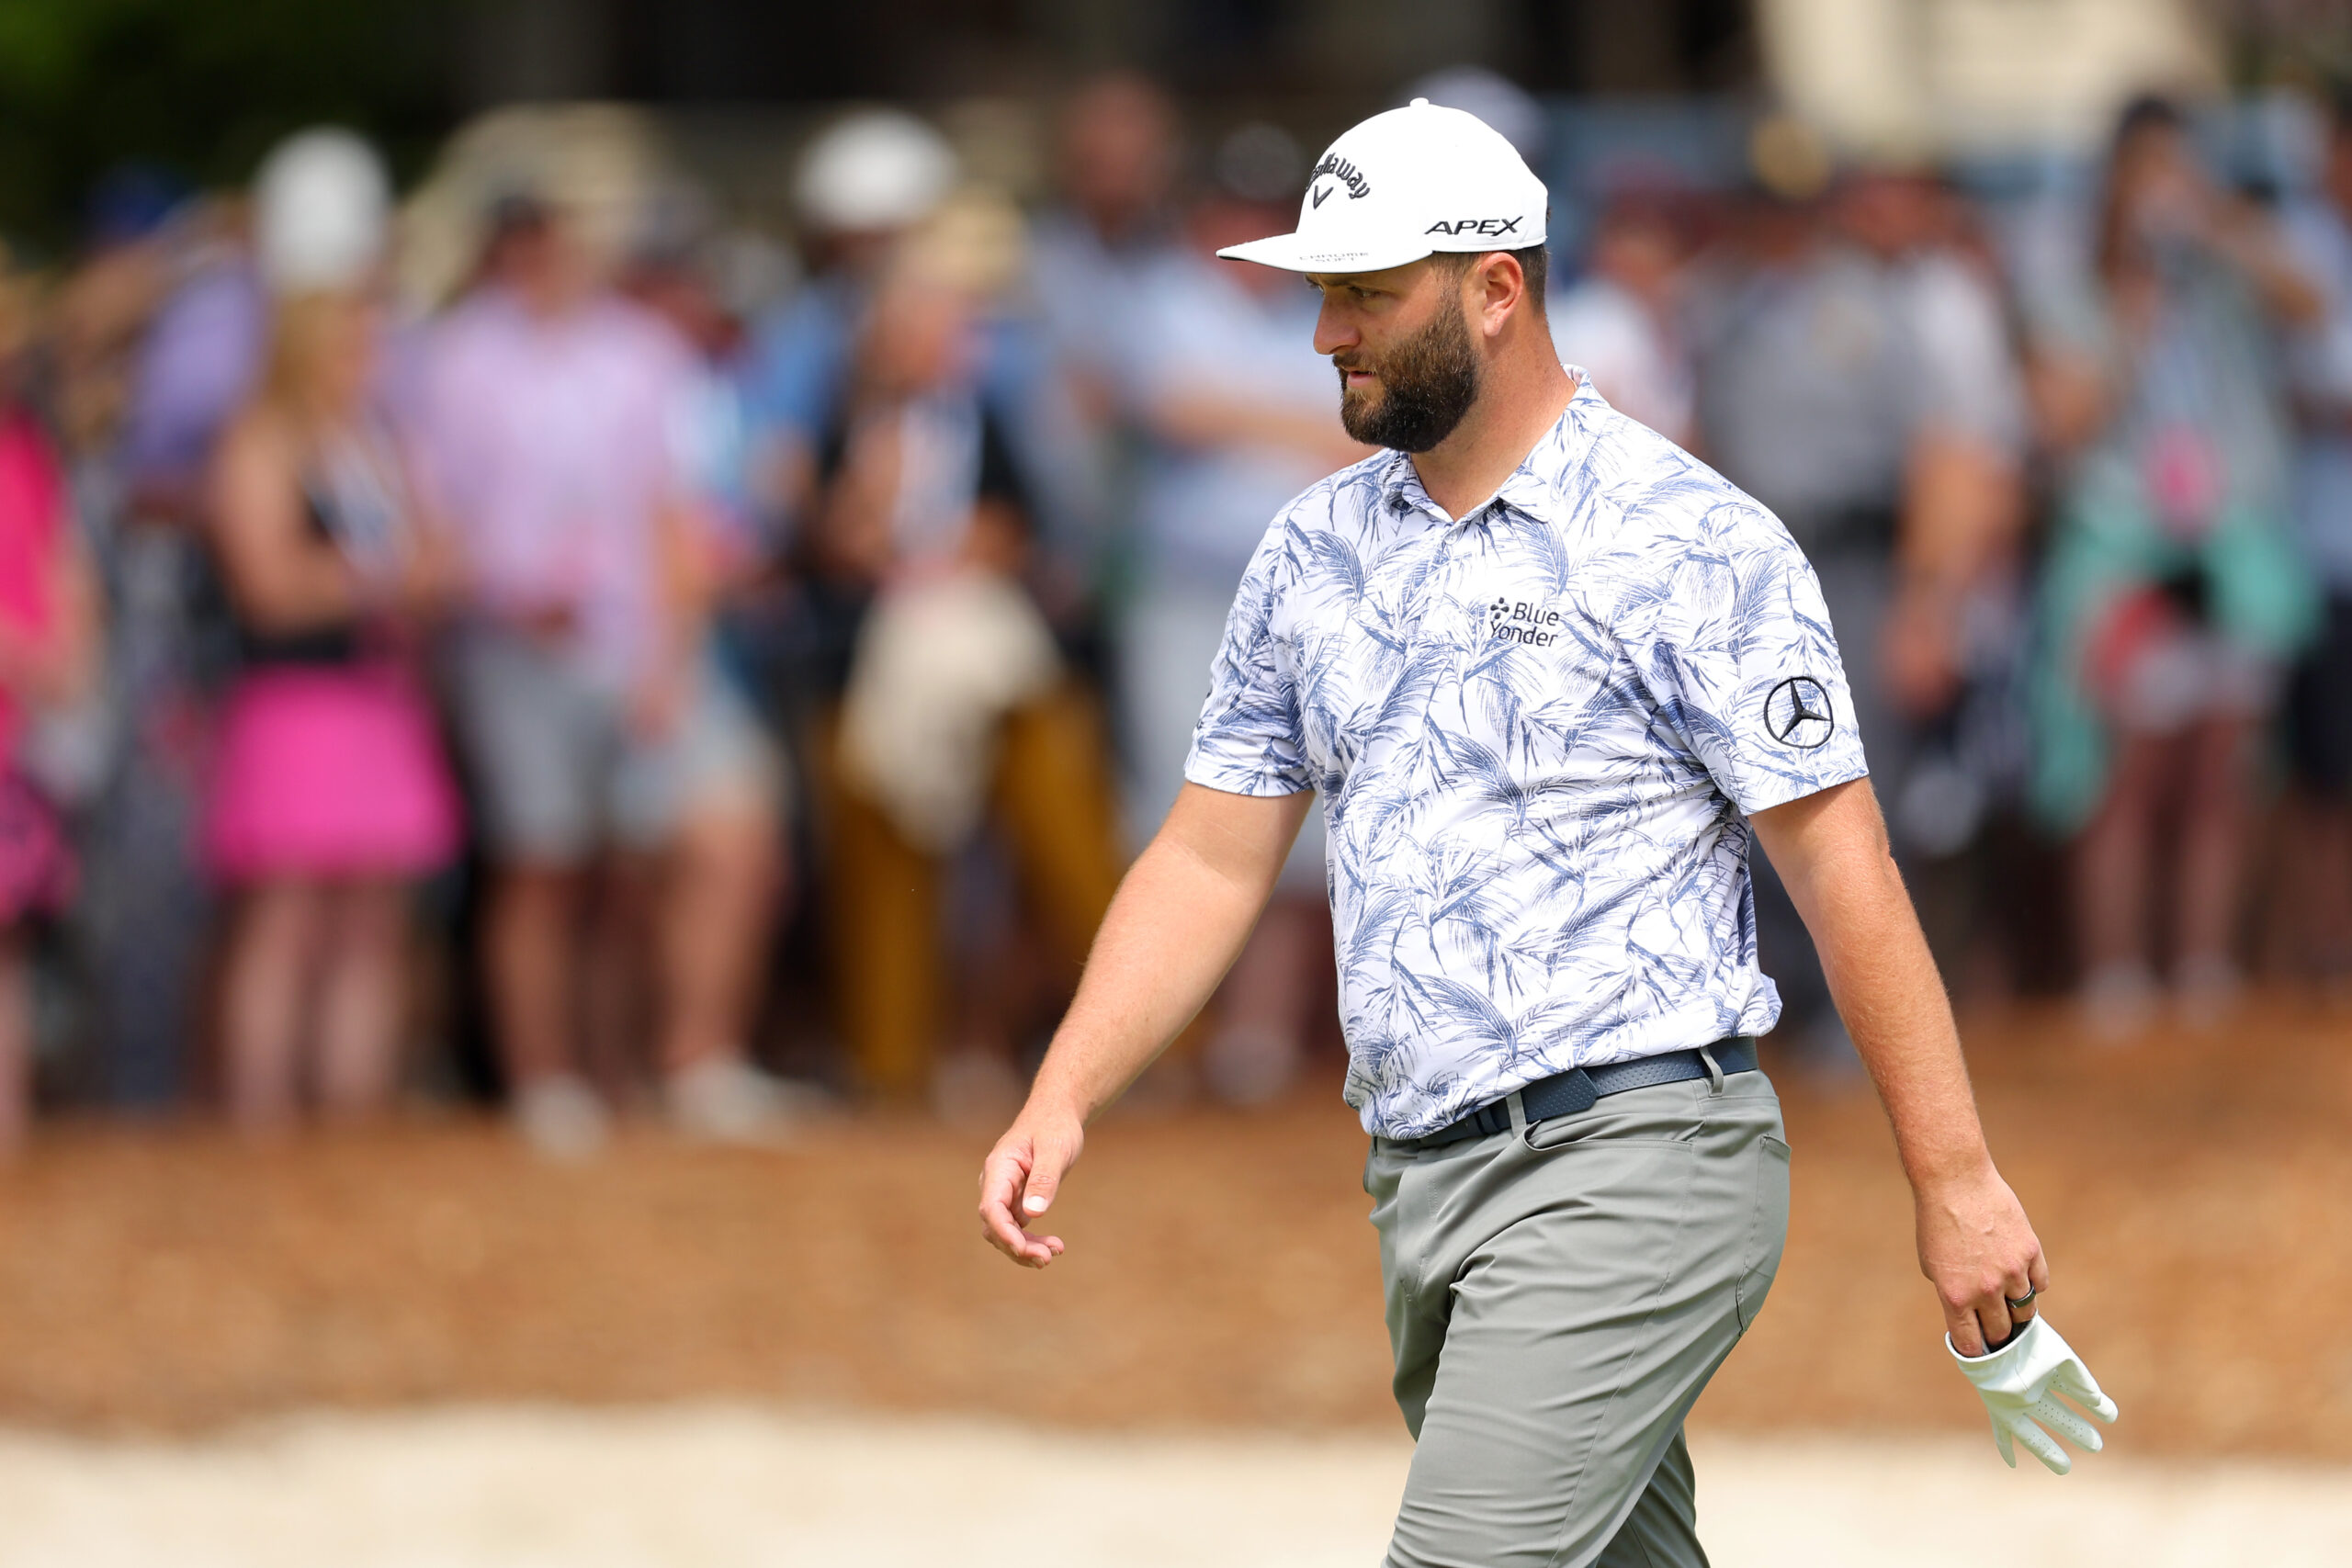 Here comes Jon Rahm, Scottie Scheffler’s putter warmed back up and more takeaways from Friday at the RBC Heritage